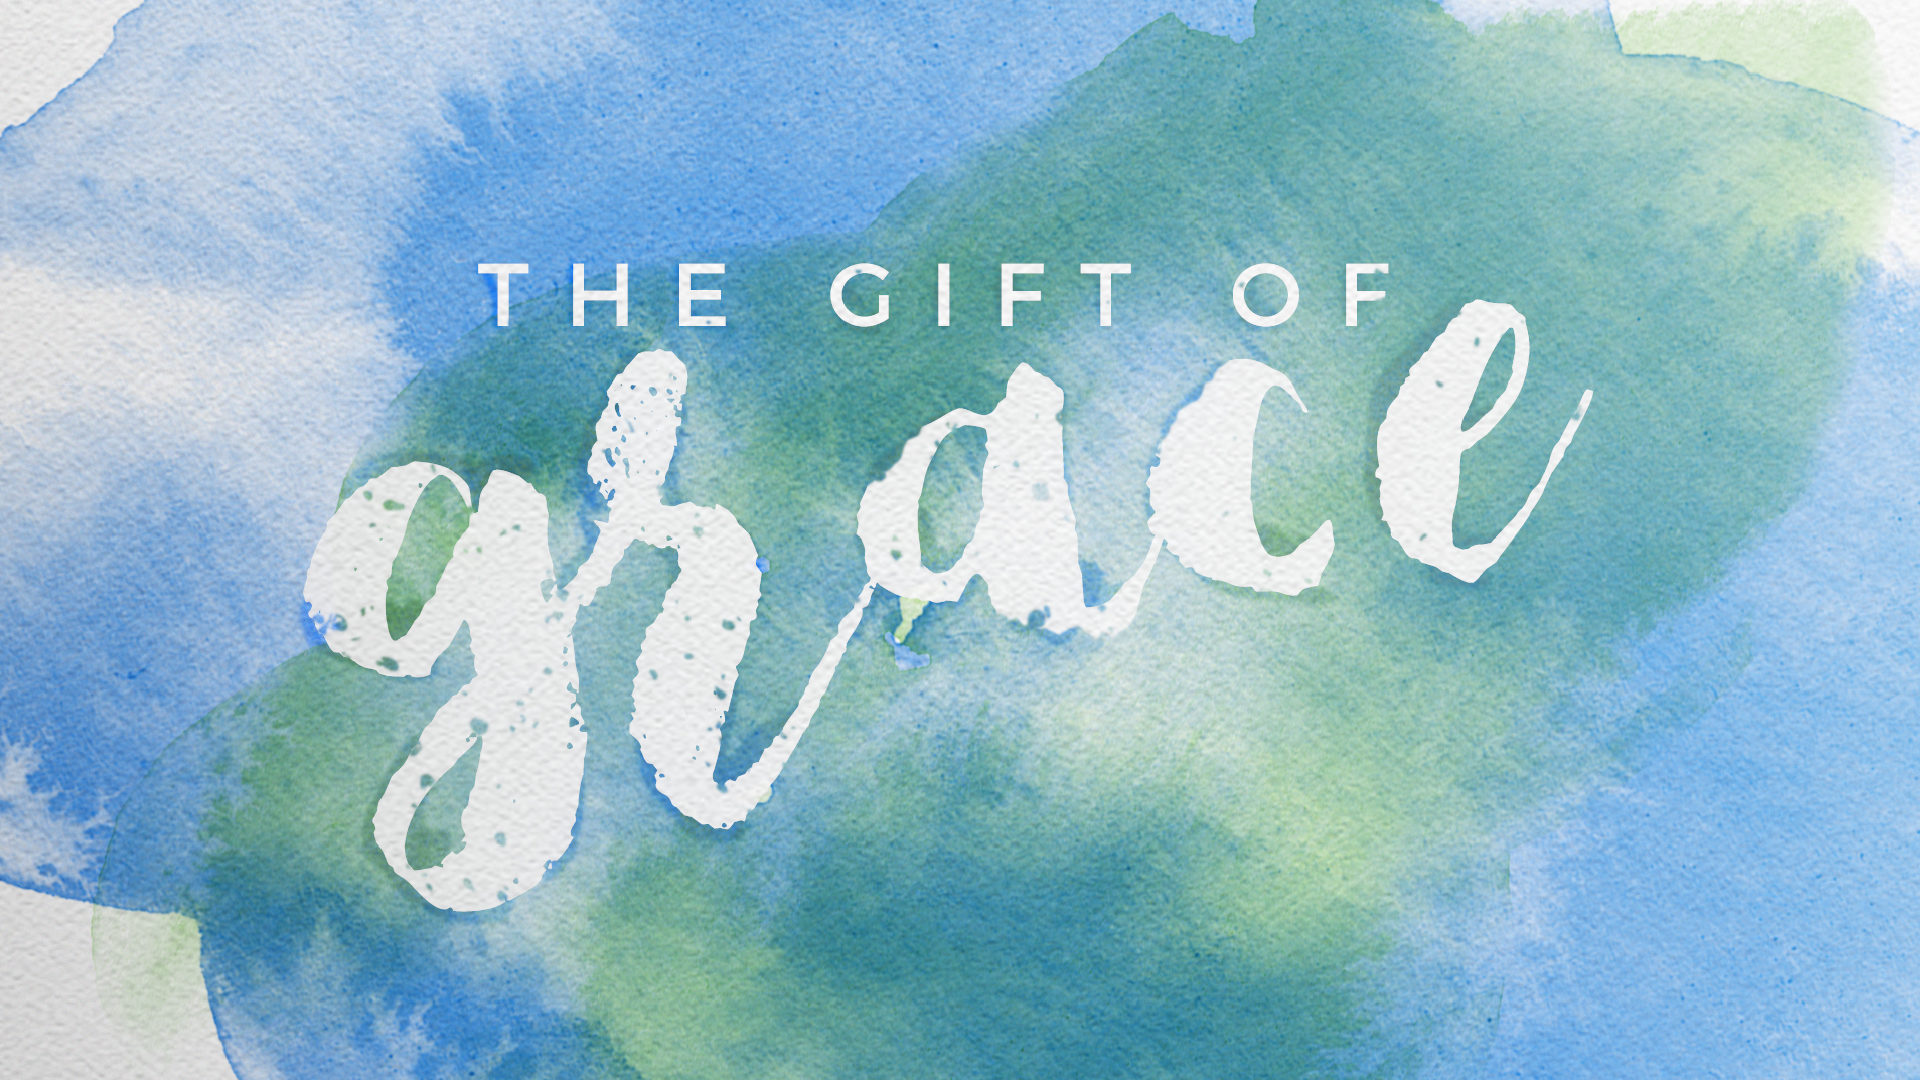 The Gift of Grace | Wholeness/Oneness/Justice